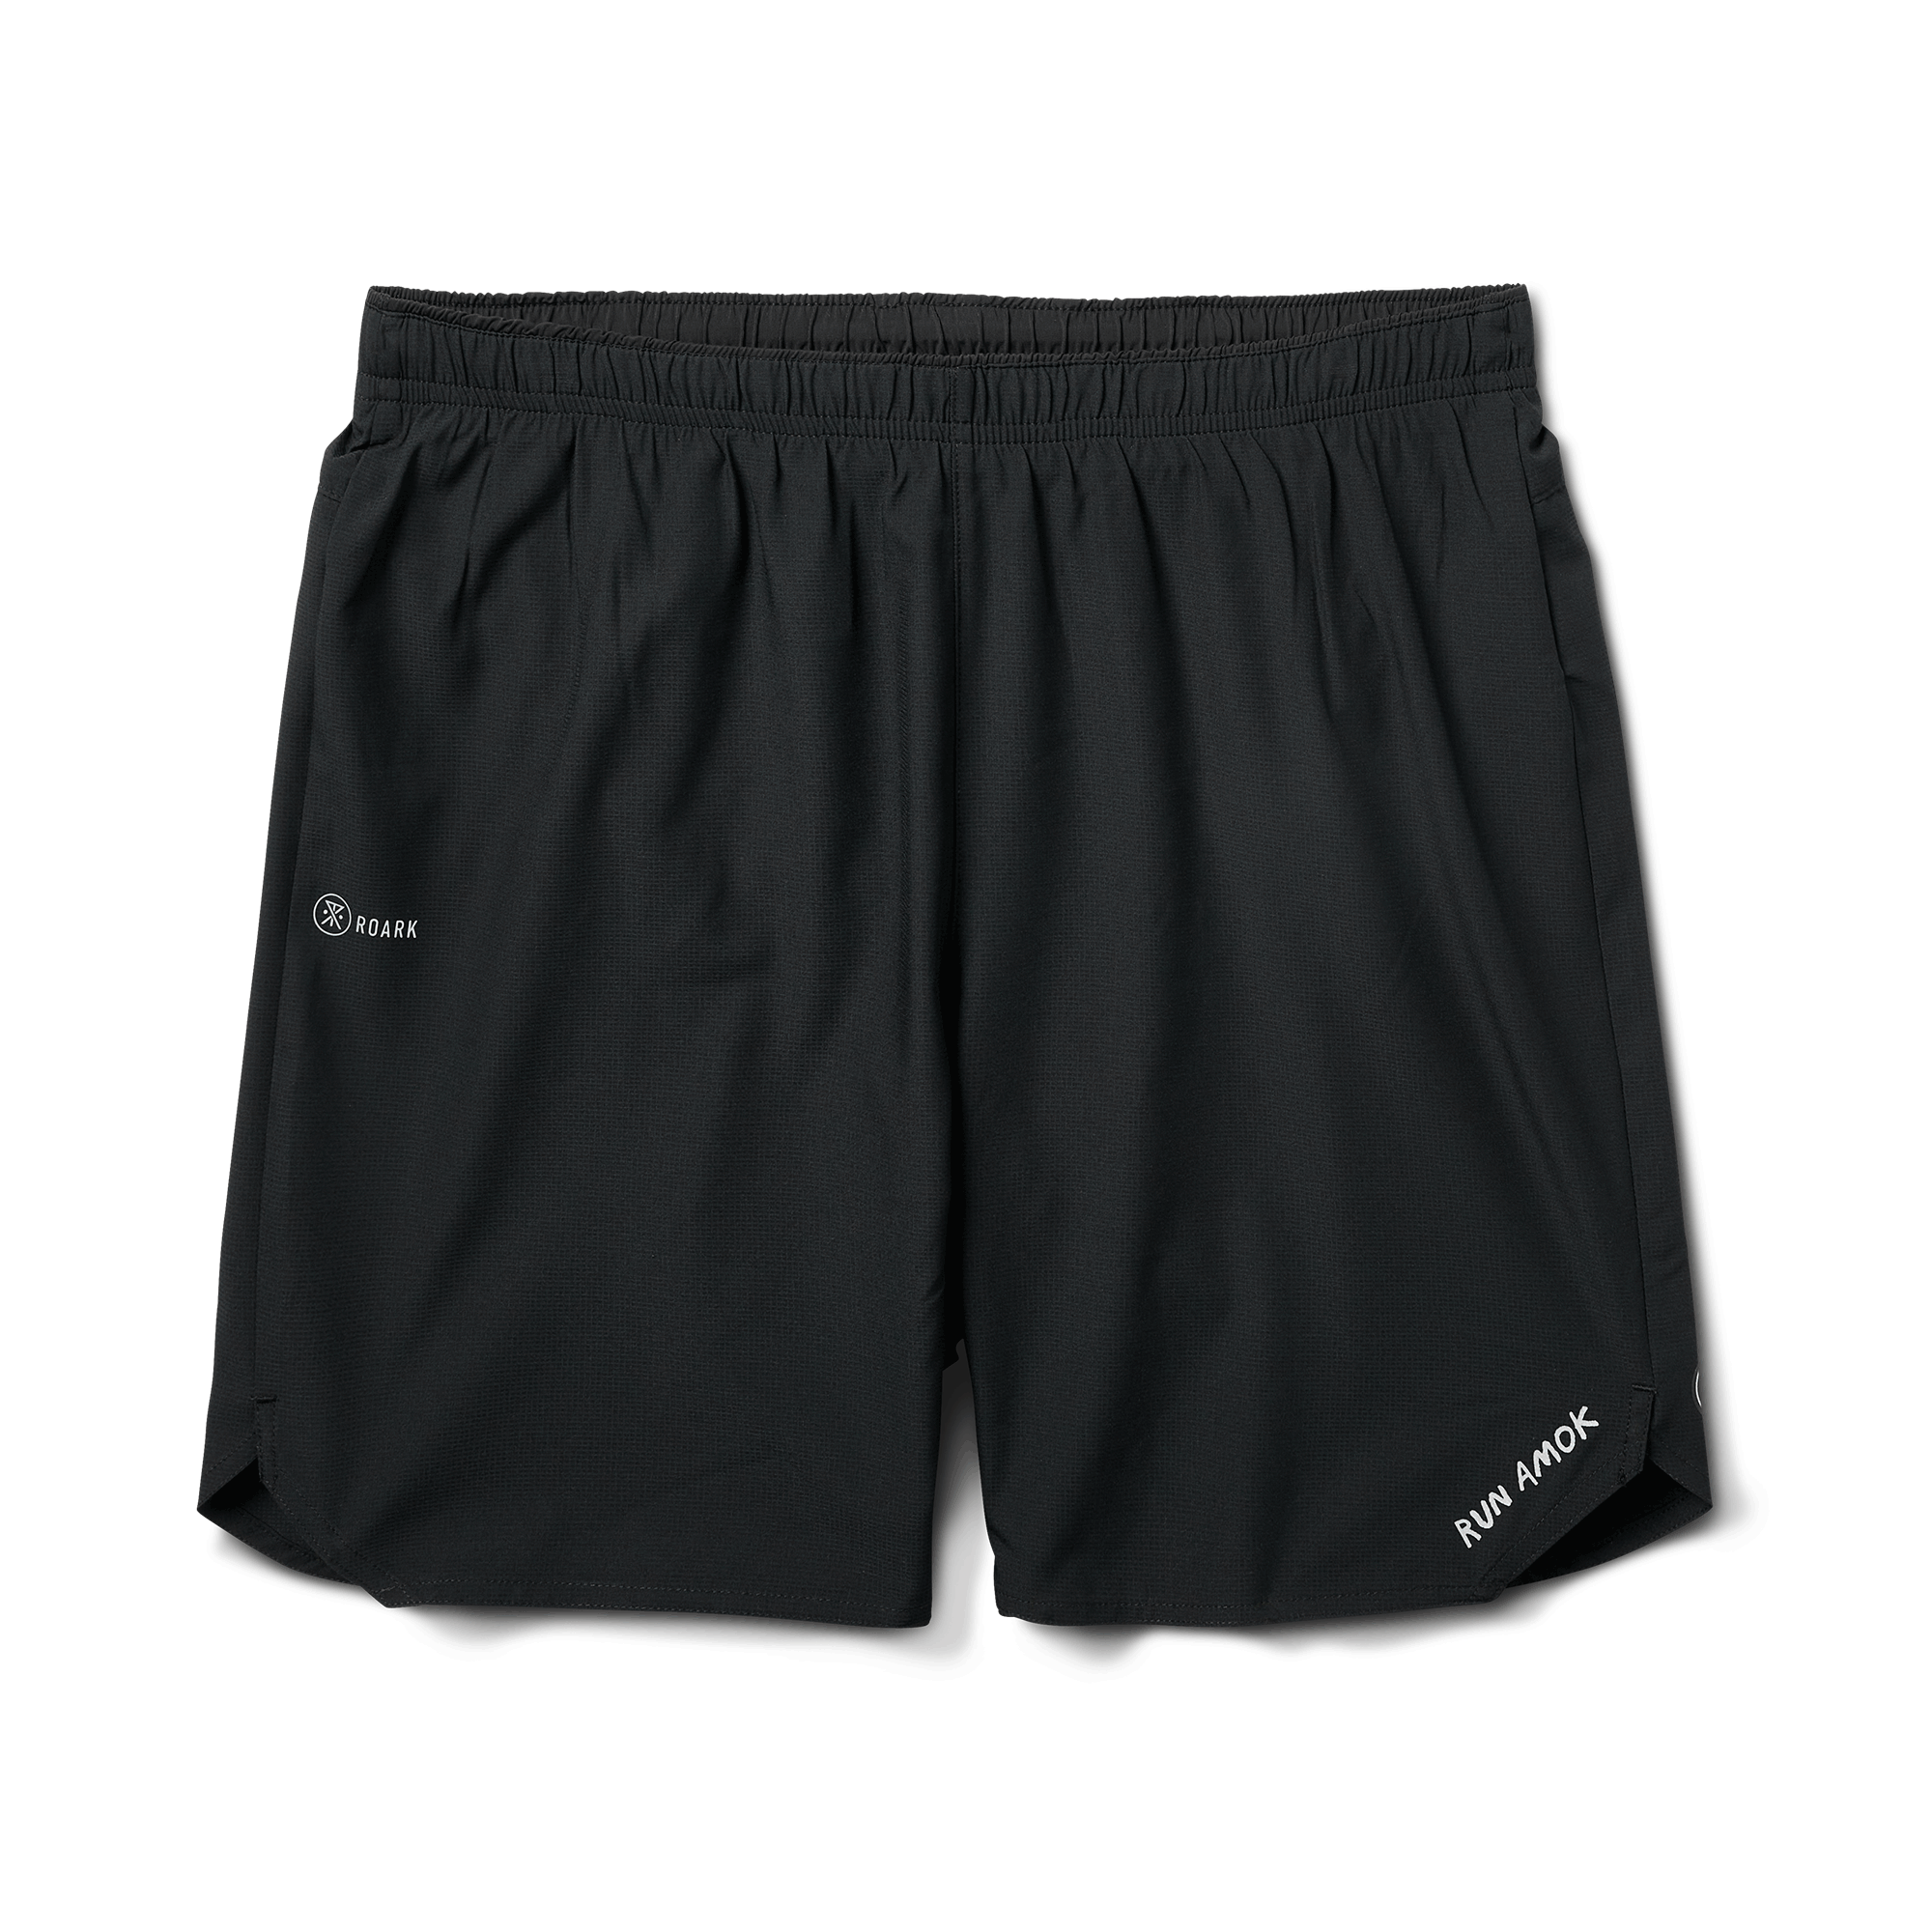 Buy Women Polyester 2-In-1 Anti-Chafing Gym Shorts - Black Online